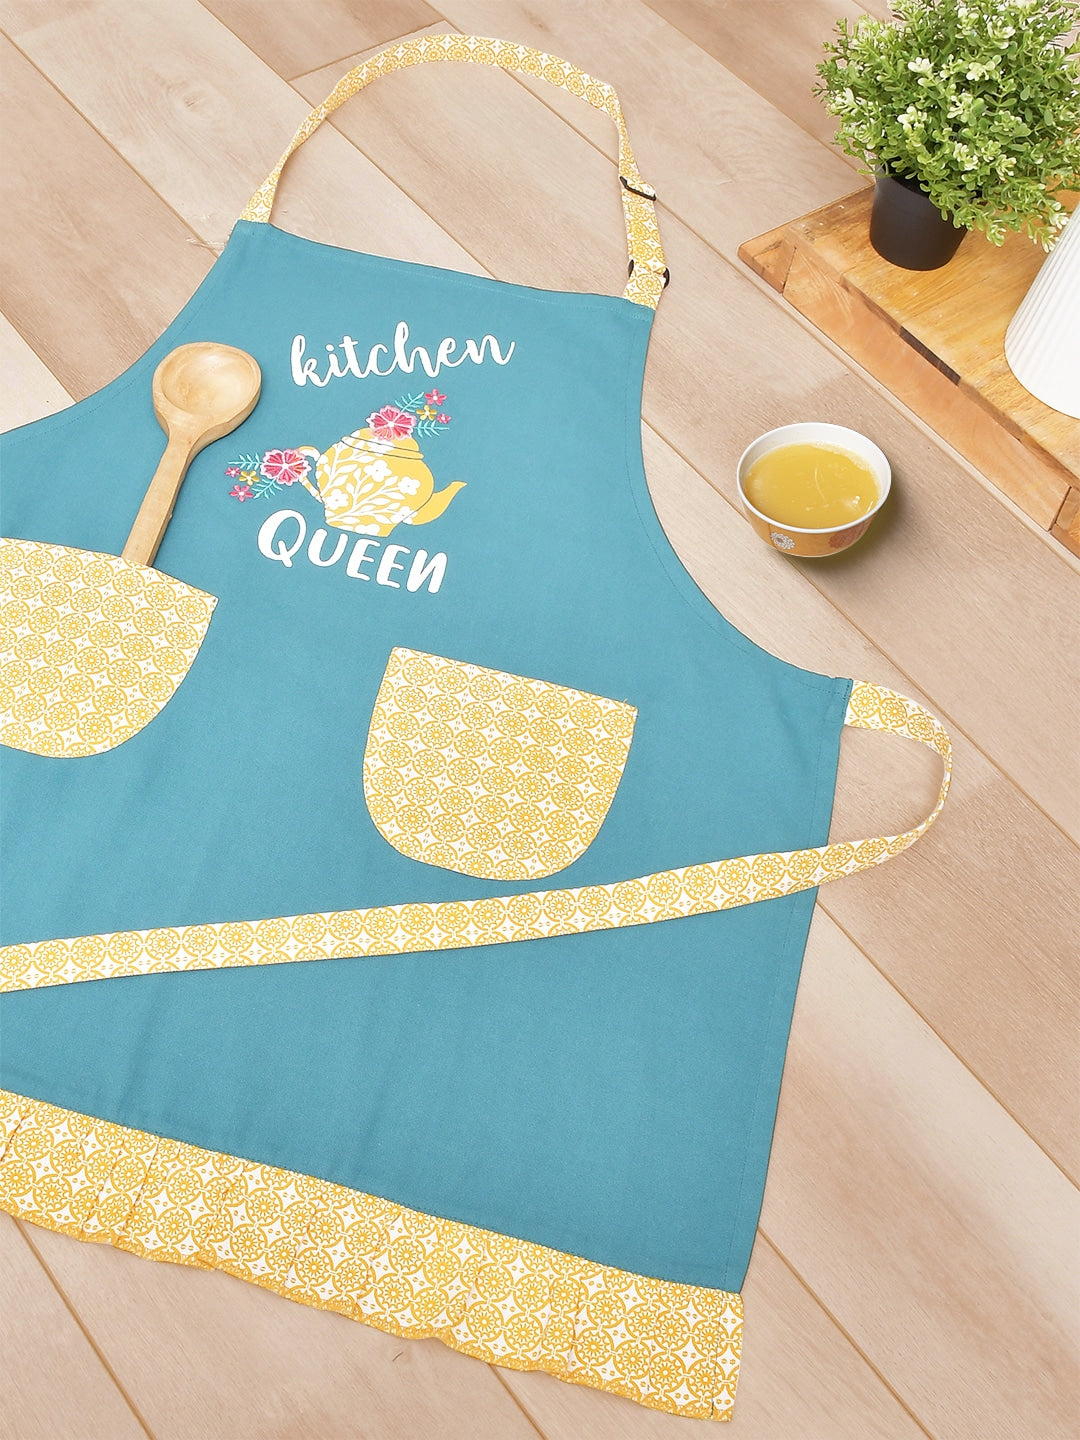 Blanc9 Kitchen Queen Teal Cotton Printed Apron